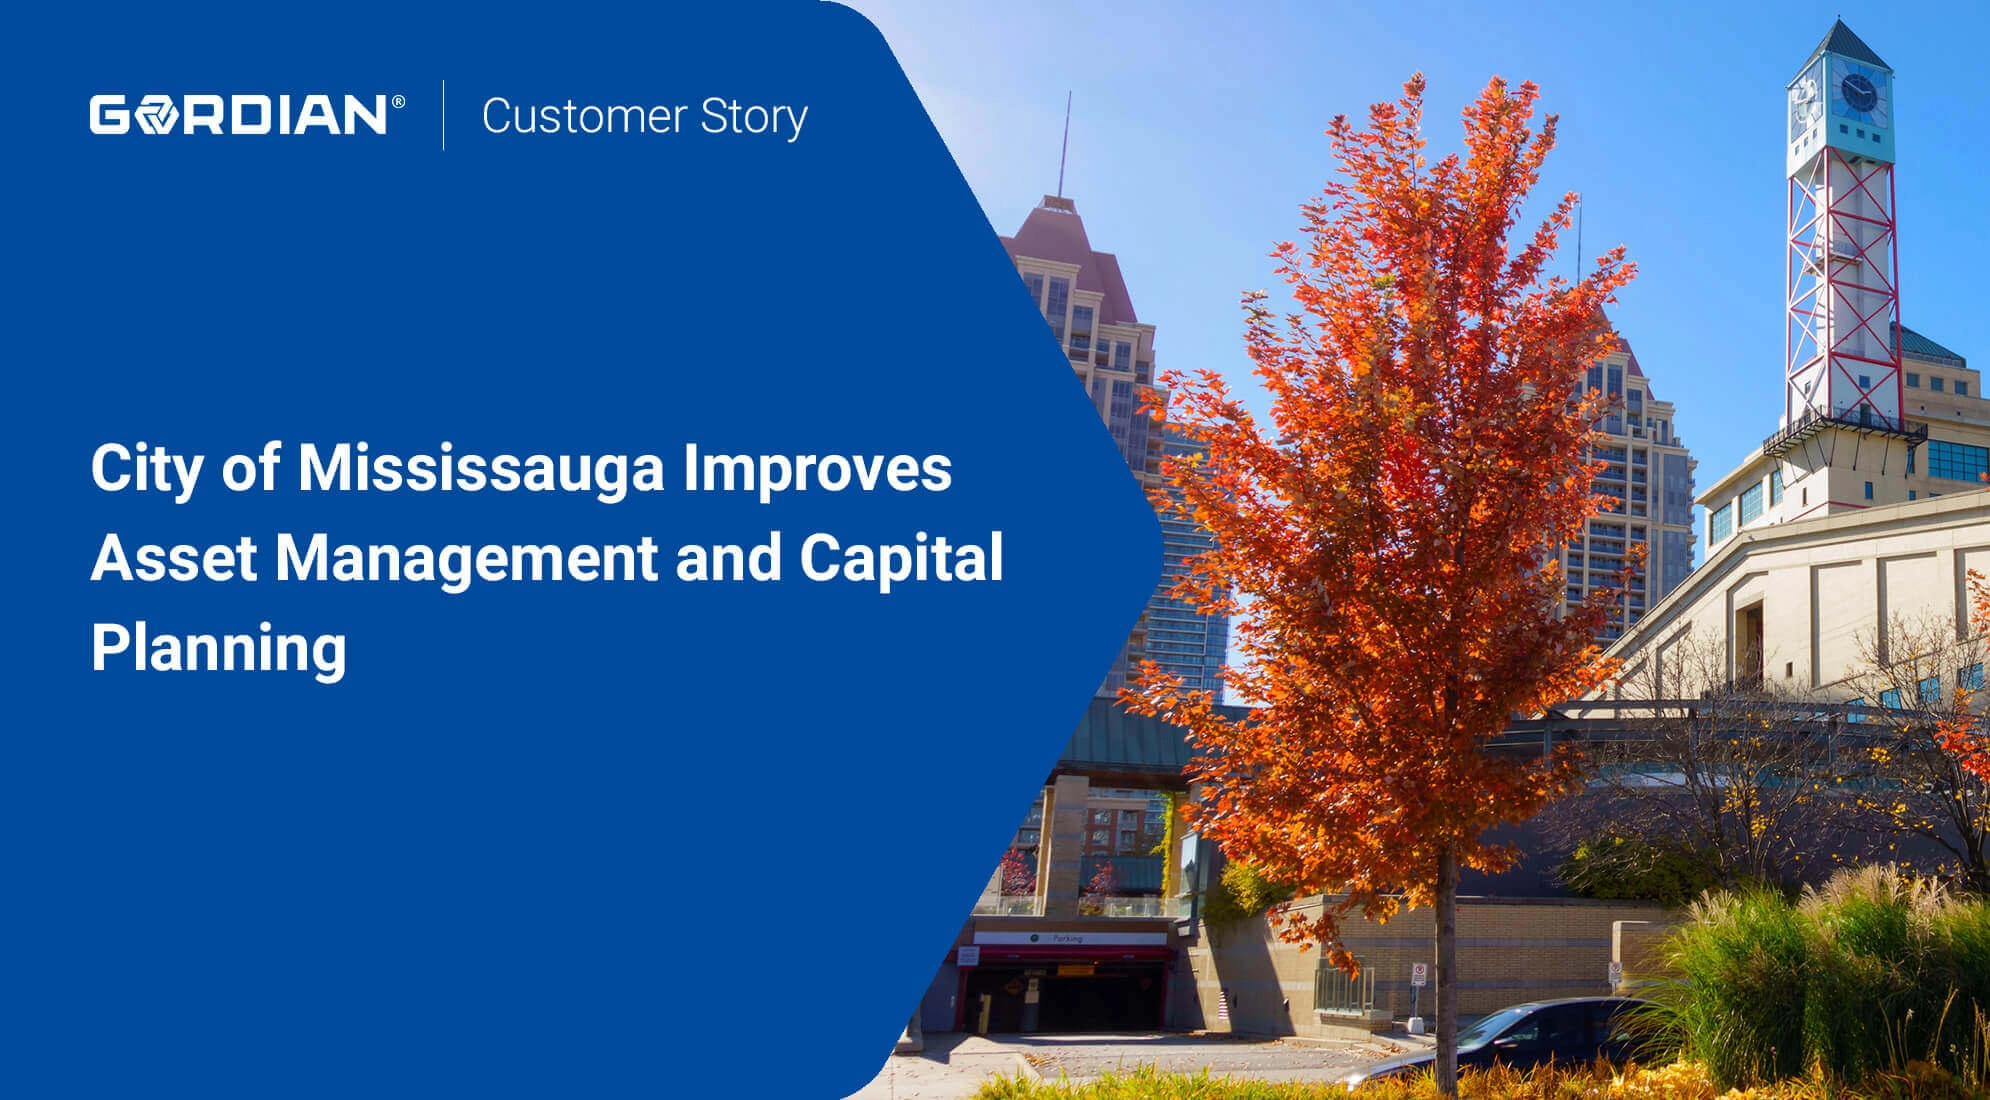 City of Mississauga Improves Asset Management and Capital Planning